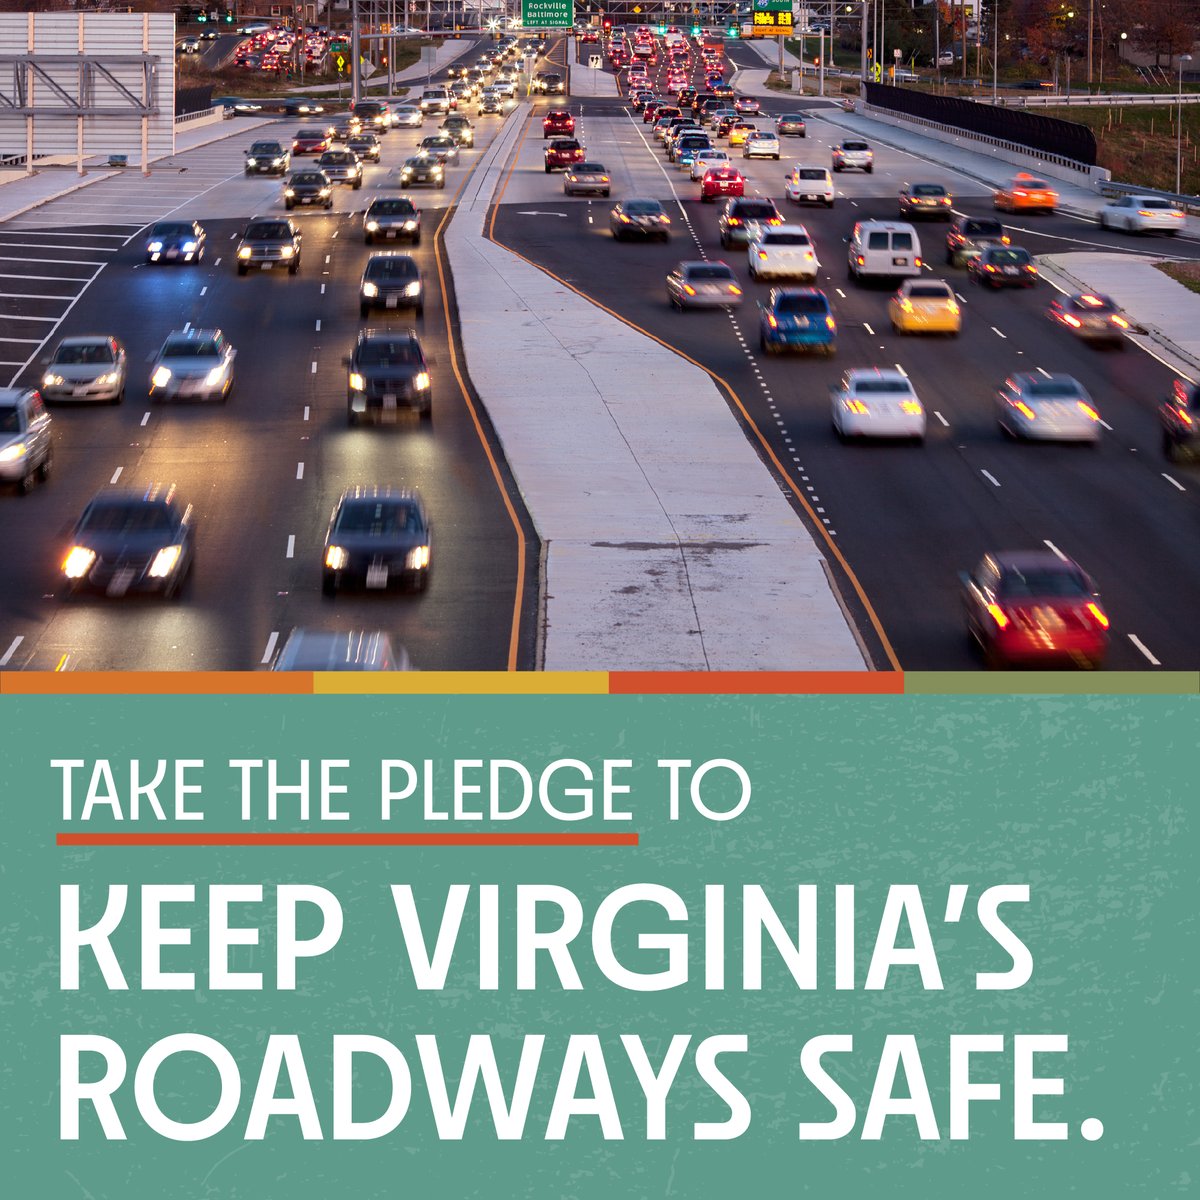 We’re supporting @virginia_cca’s Safe Driving Campaign to remind Virginians: don’t drive high. Plan for a sober ride. Learn more here: bit.ly/49yaKwR #DontDriveHighVA